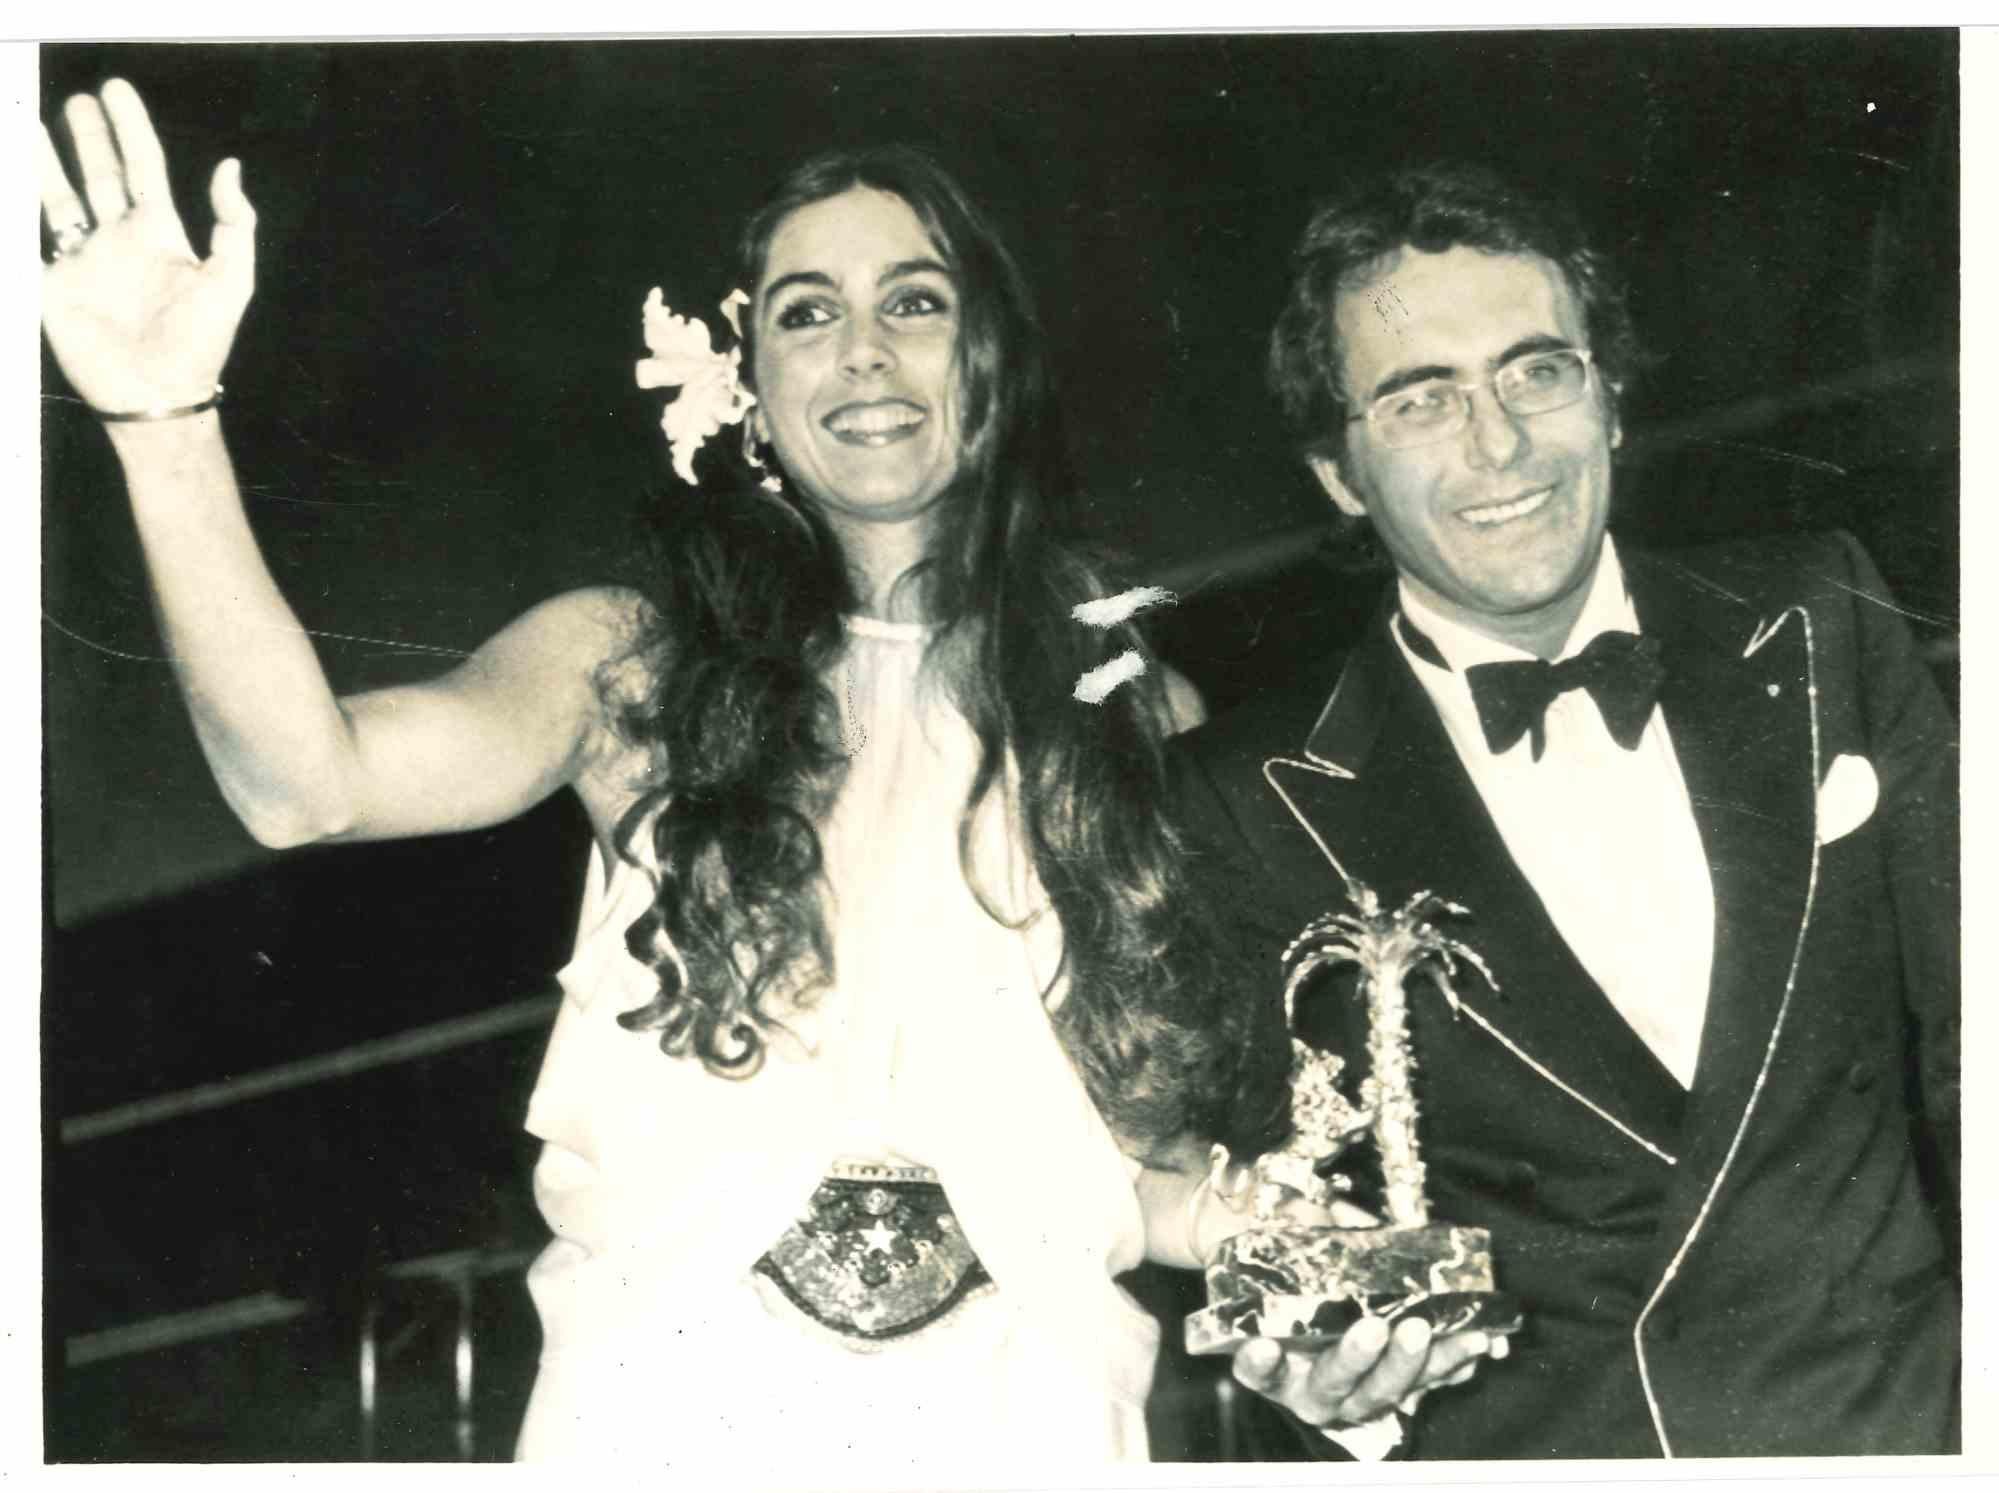 Unknown Figurative Photograph - Al Bano and Romina - Vintage Photograph - 1980s